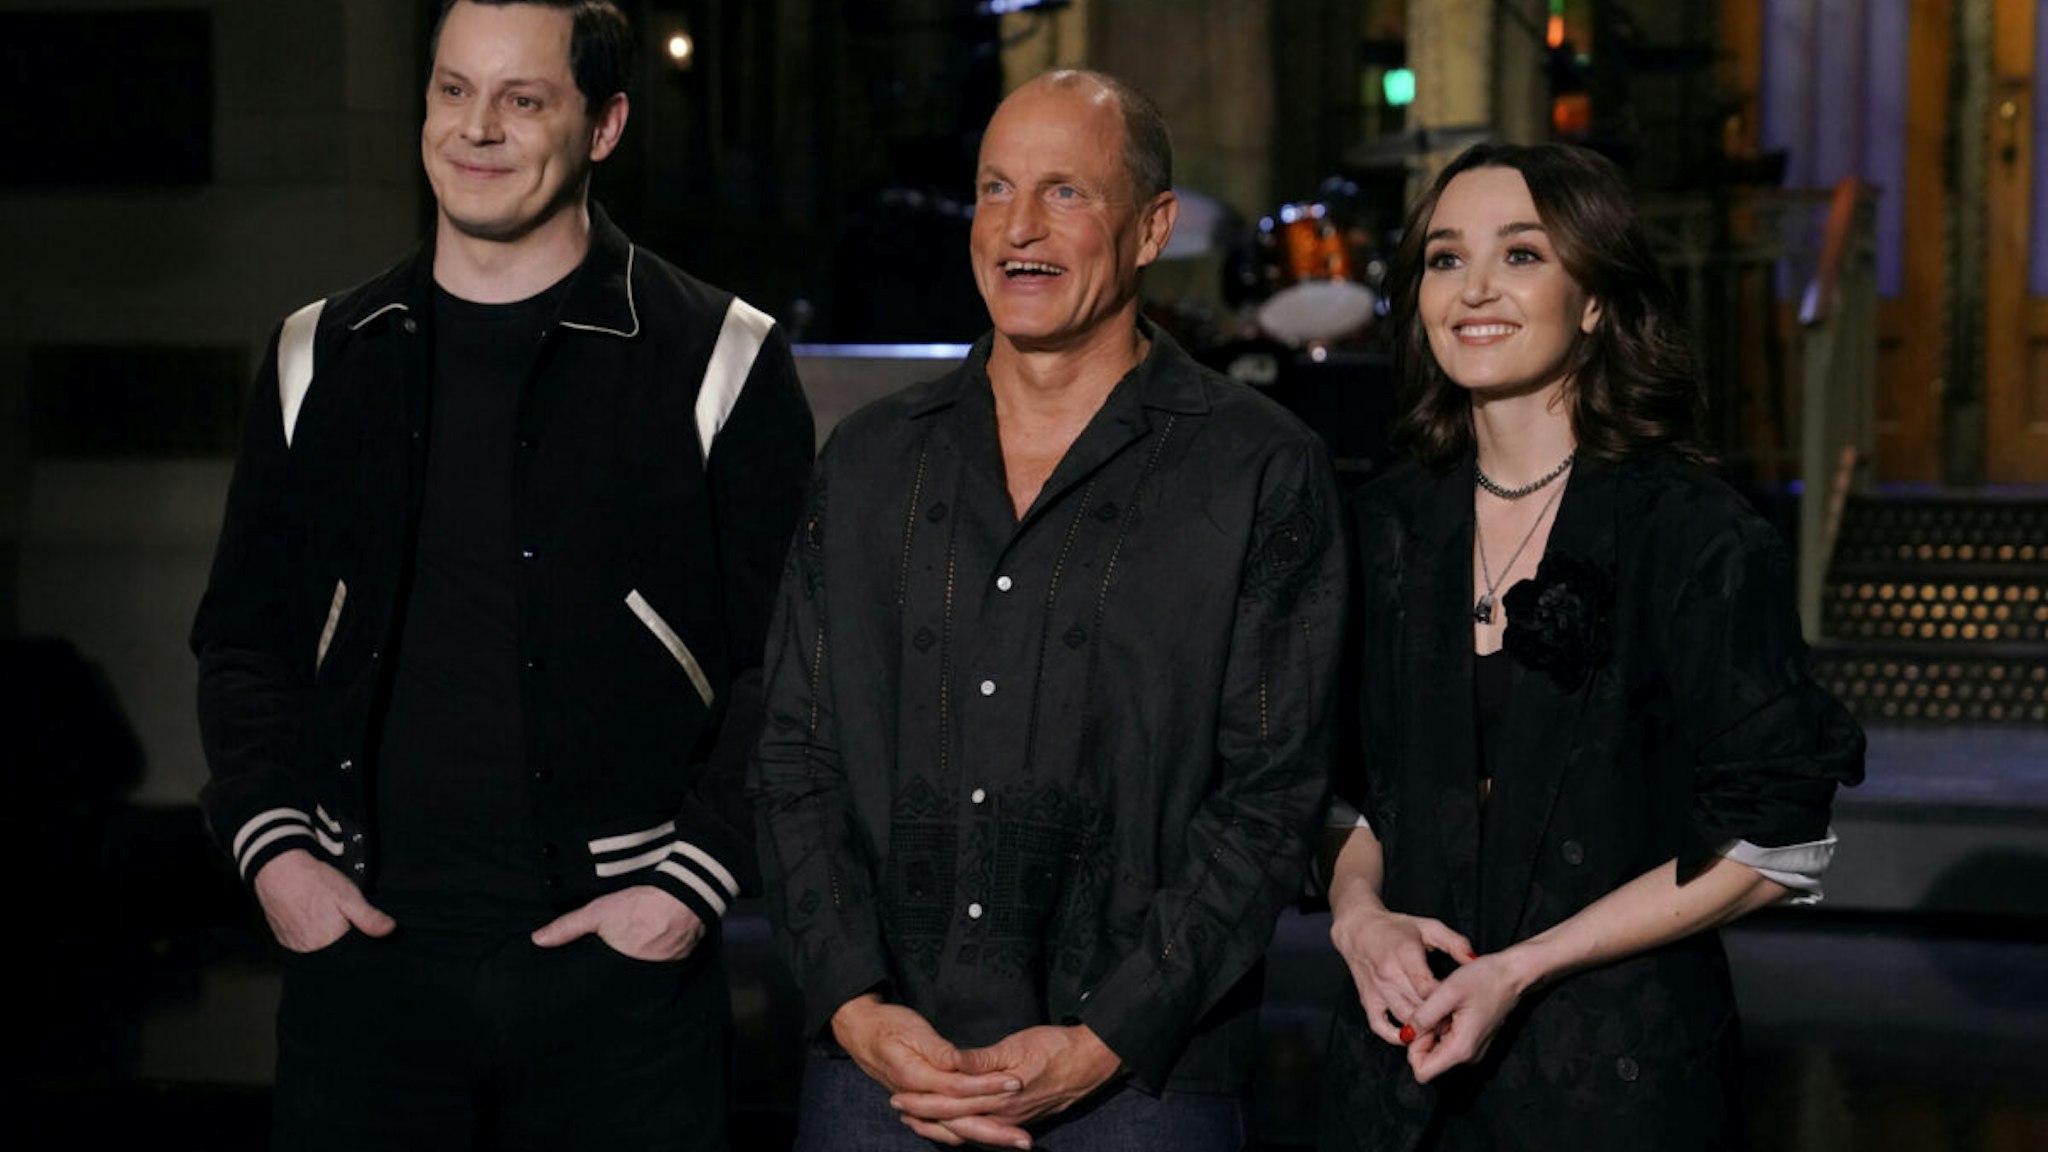 Woody Harrelson, Jack White Episode 1839 -- Pictured: (l-r) Musical Guest Jack White, Host Woody Harrelson, and Chloe Fineman during Promos in Studio 8H on Thursday, February 23, 2023